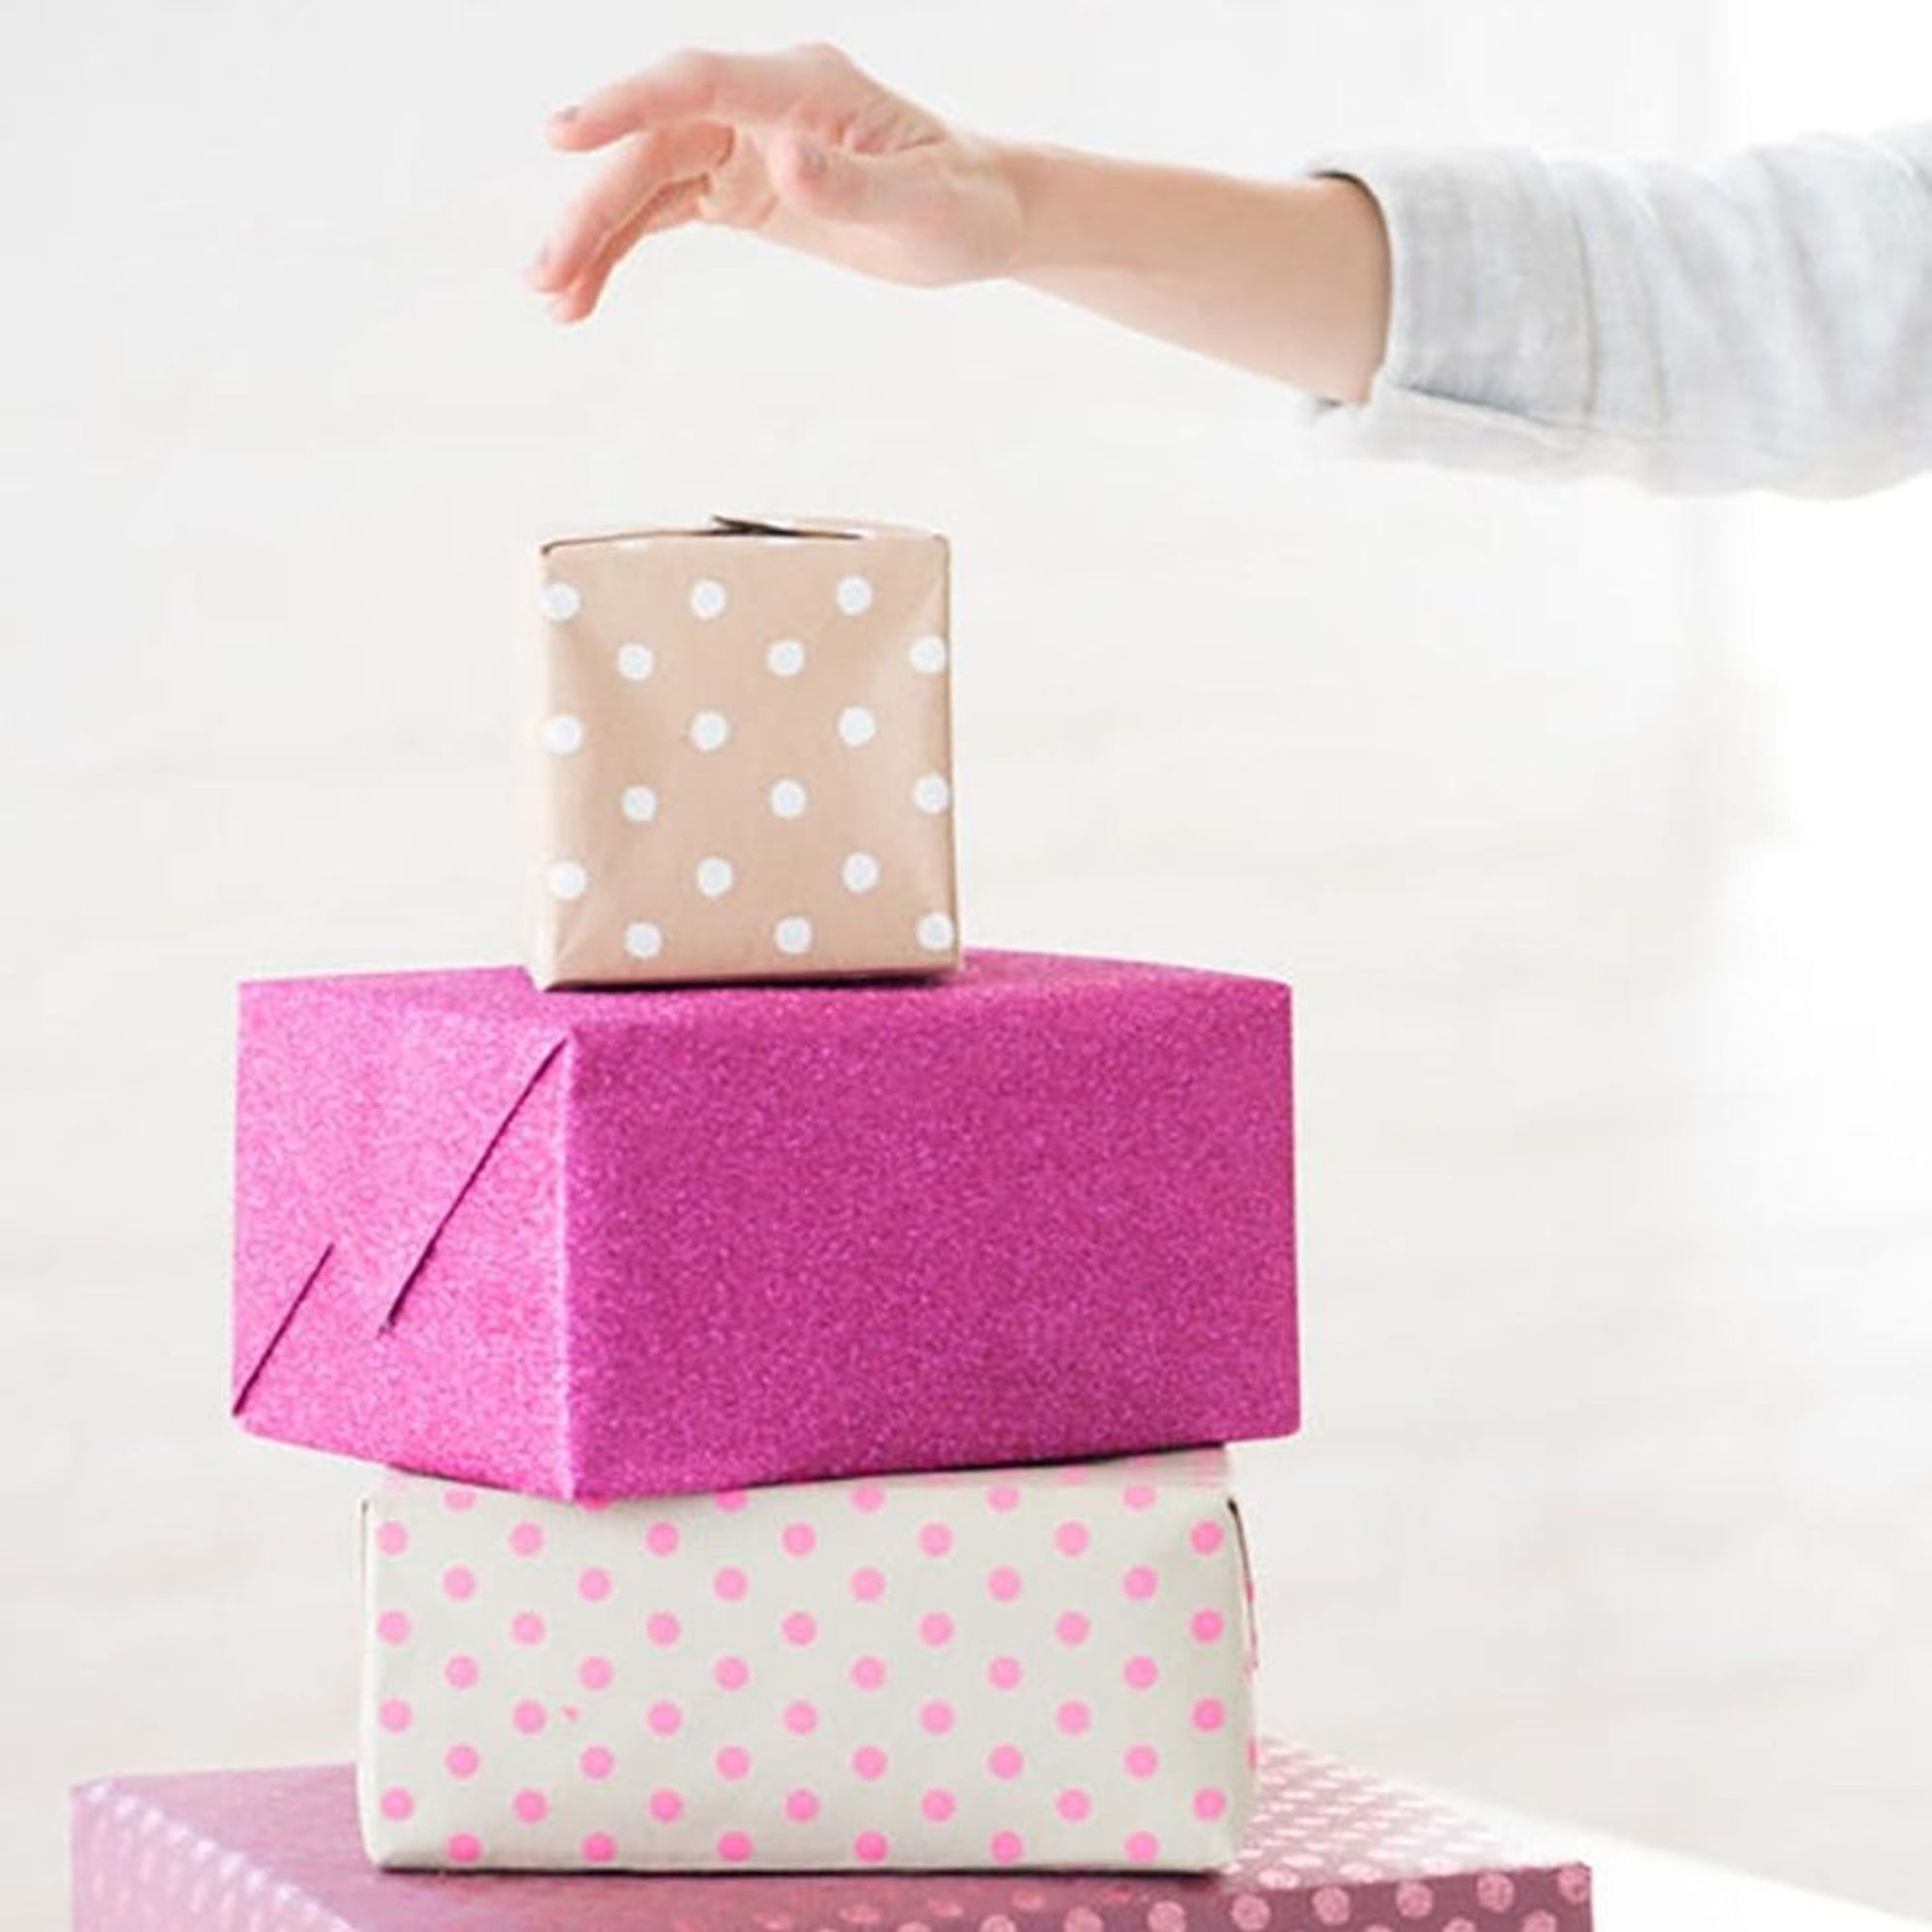 Gift Wrap Hacks to Make Sure Your Present Is the First One Opened ...